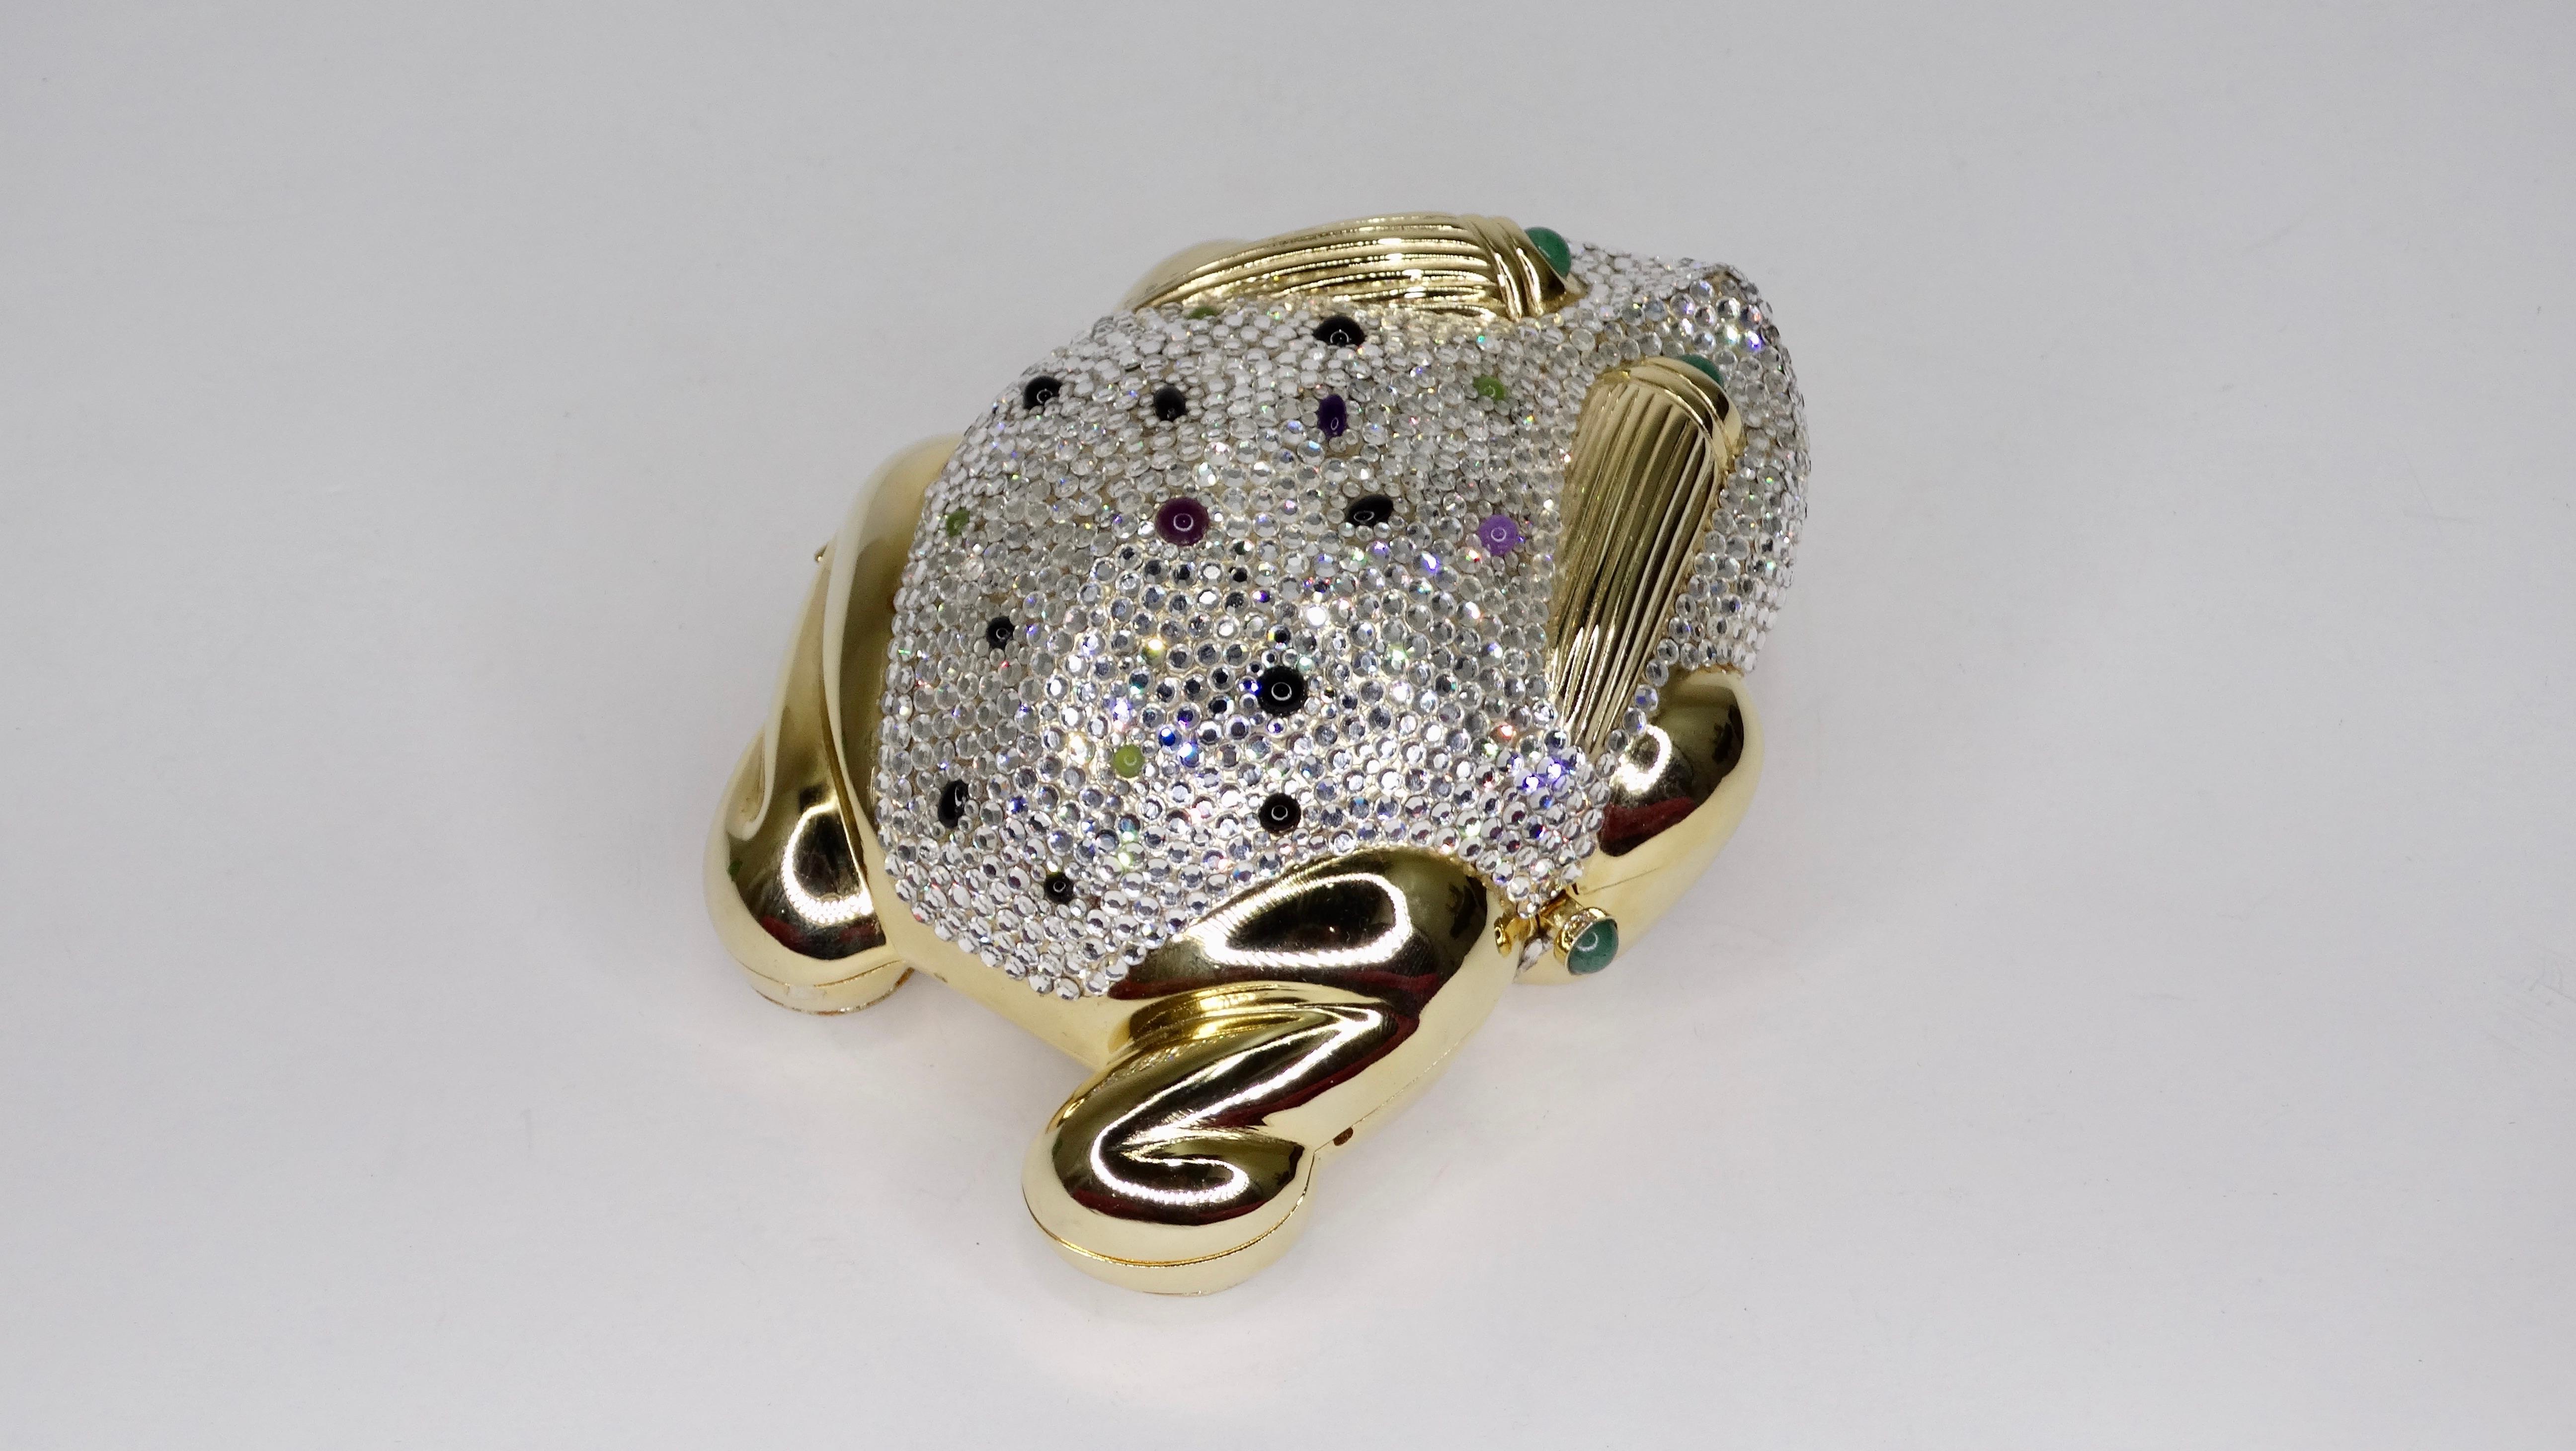 Add this amazing piece to your collection! Circa 1980s, this Judith Leiber frog miniaudiere features multi color Jade, Amethyst and Onyx stones with a push-lock closure. Gold Plated hardware encrusted with Austrian Swarovski Crystals. Judith Leiber